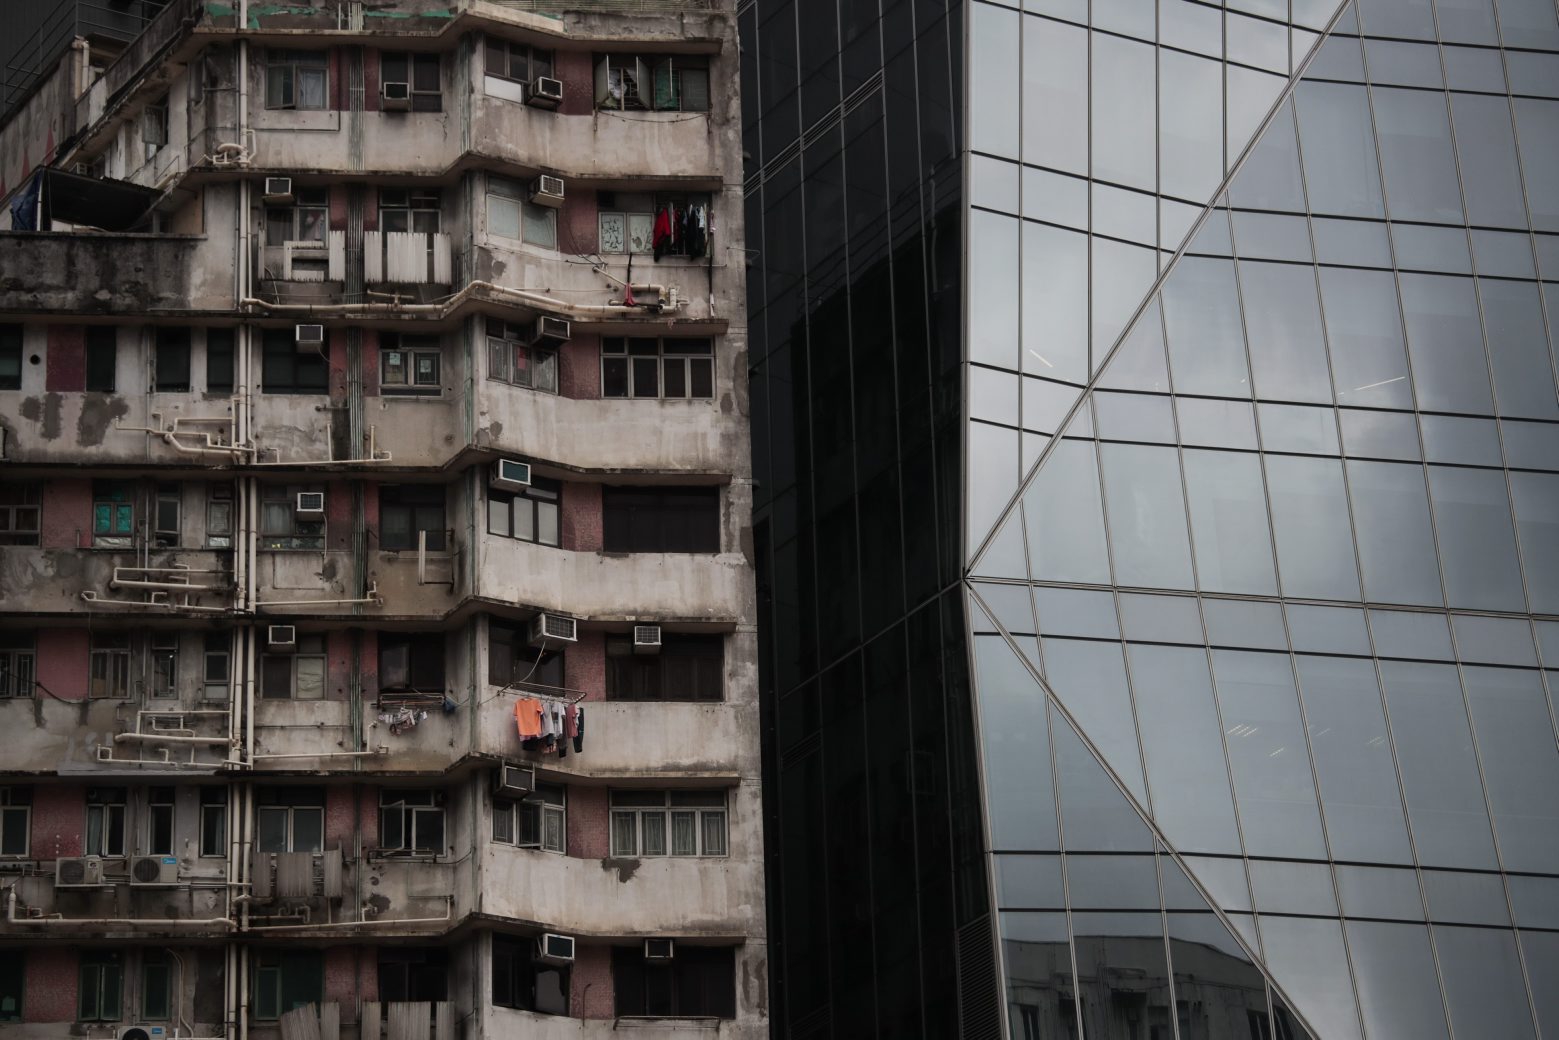 In this Sept. 1, 2019, photo, an old apartment building stands next to a gleaming tower in Hong Kong. Life is not quite normal after three months of steady protests in the Asian financial center - and yet normal life goes on, as it must, for the cityÄôs 7.4 million residents. (AP Photo/Jae C. Hong) APTOPIX Hong Kong Life Goes On Photo Gallery